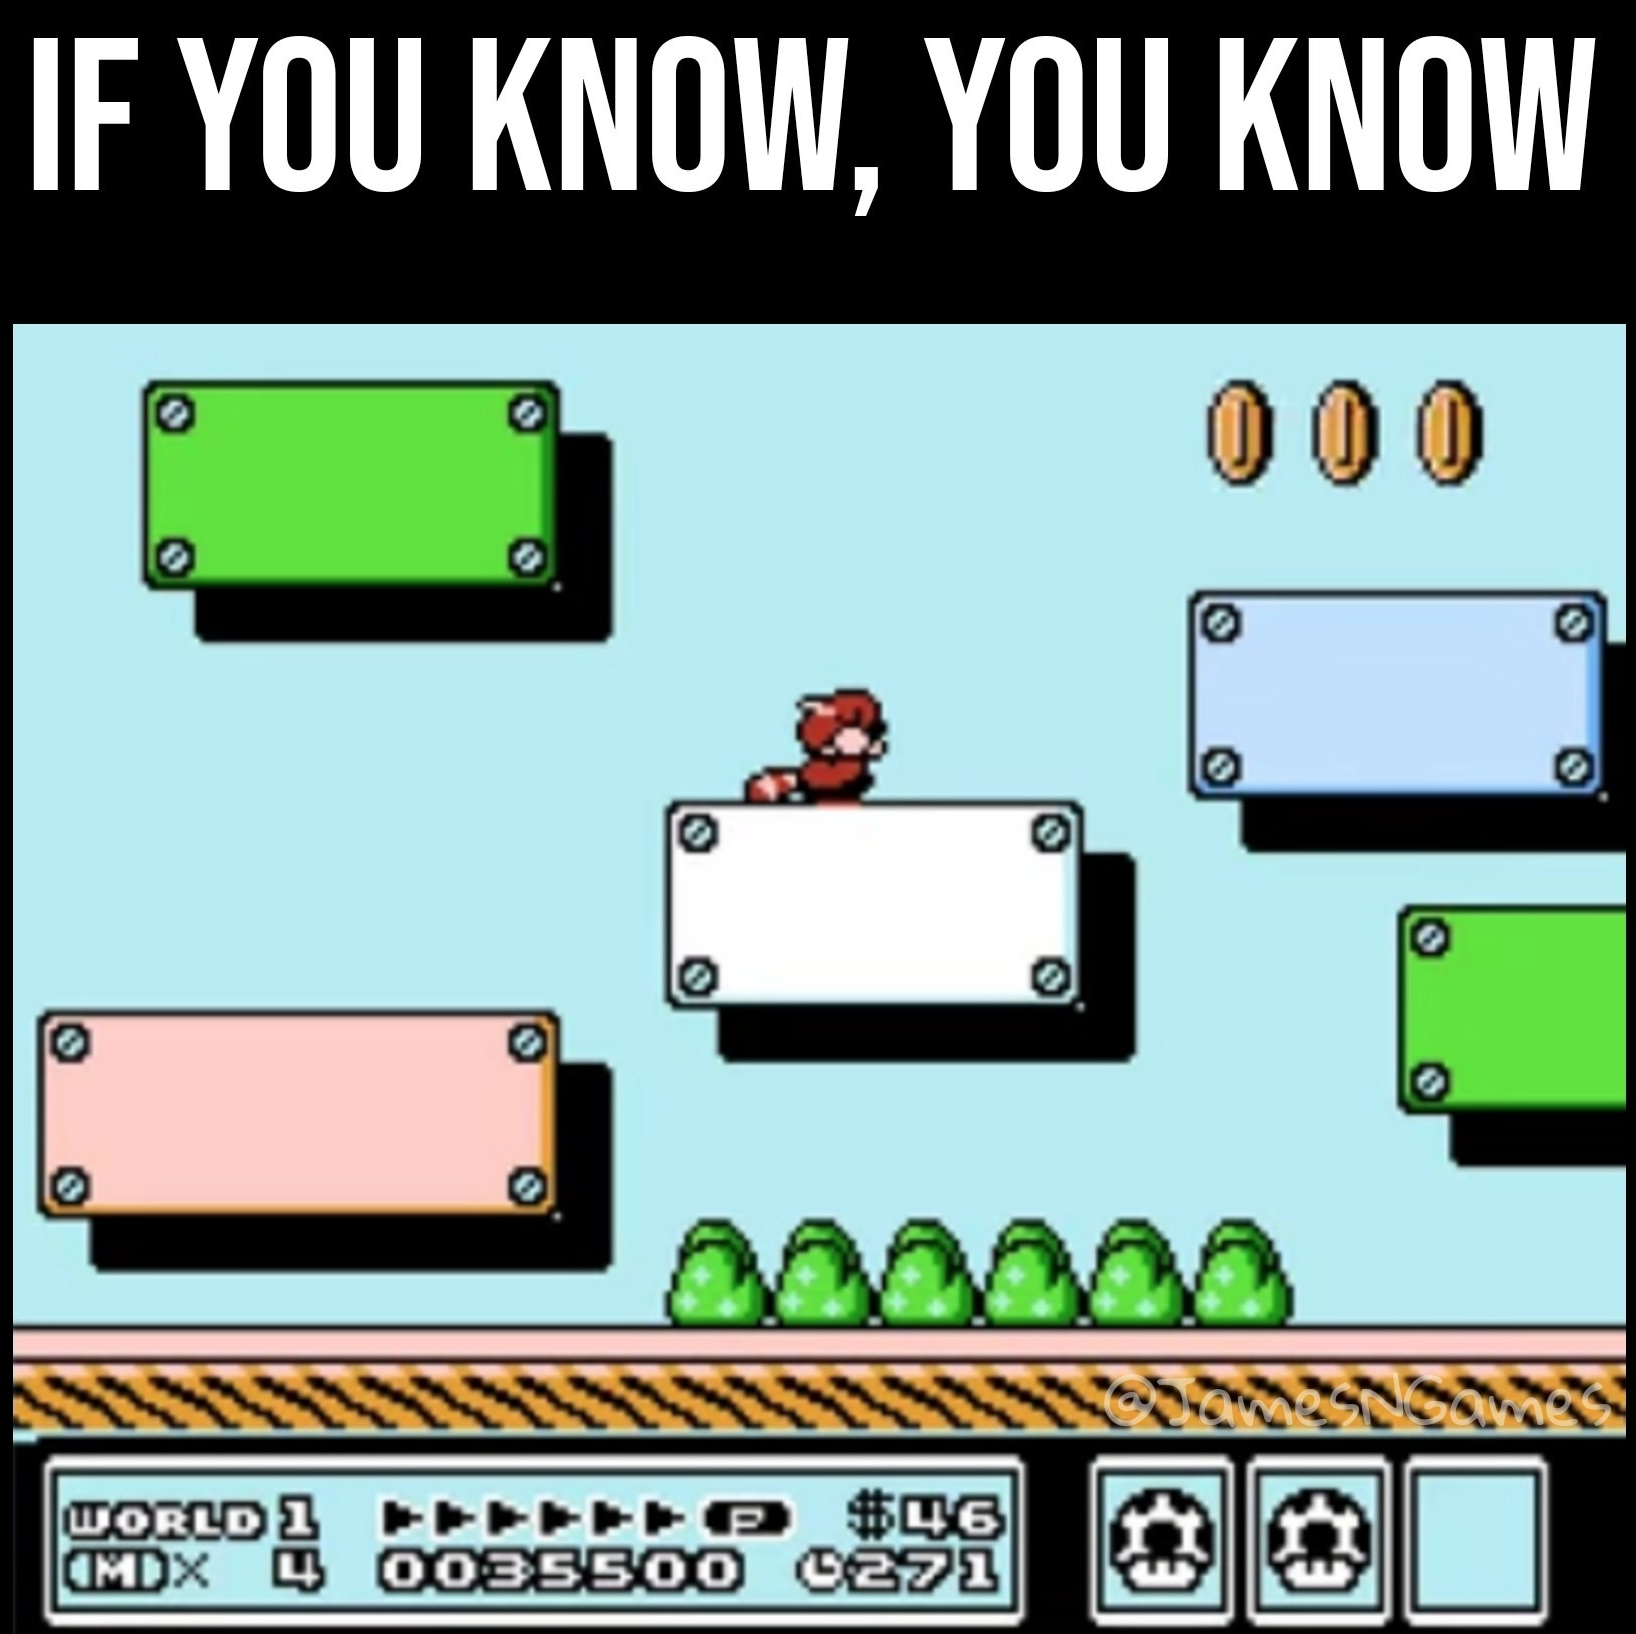 funny gaming memes - super mario bros 3 level 1 warp whistle - If You Know, You Know 000 o lo World 1 P Cimdx 400E5500 C271